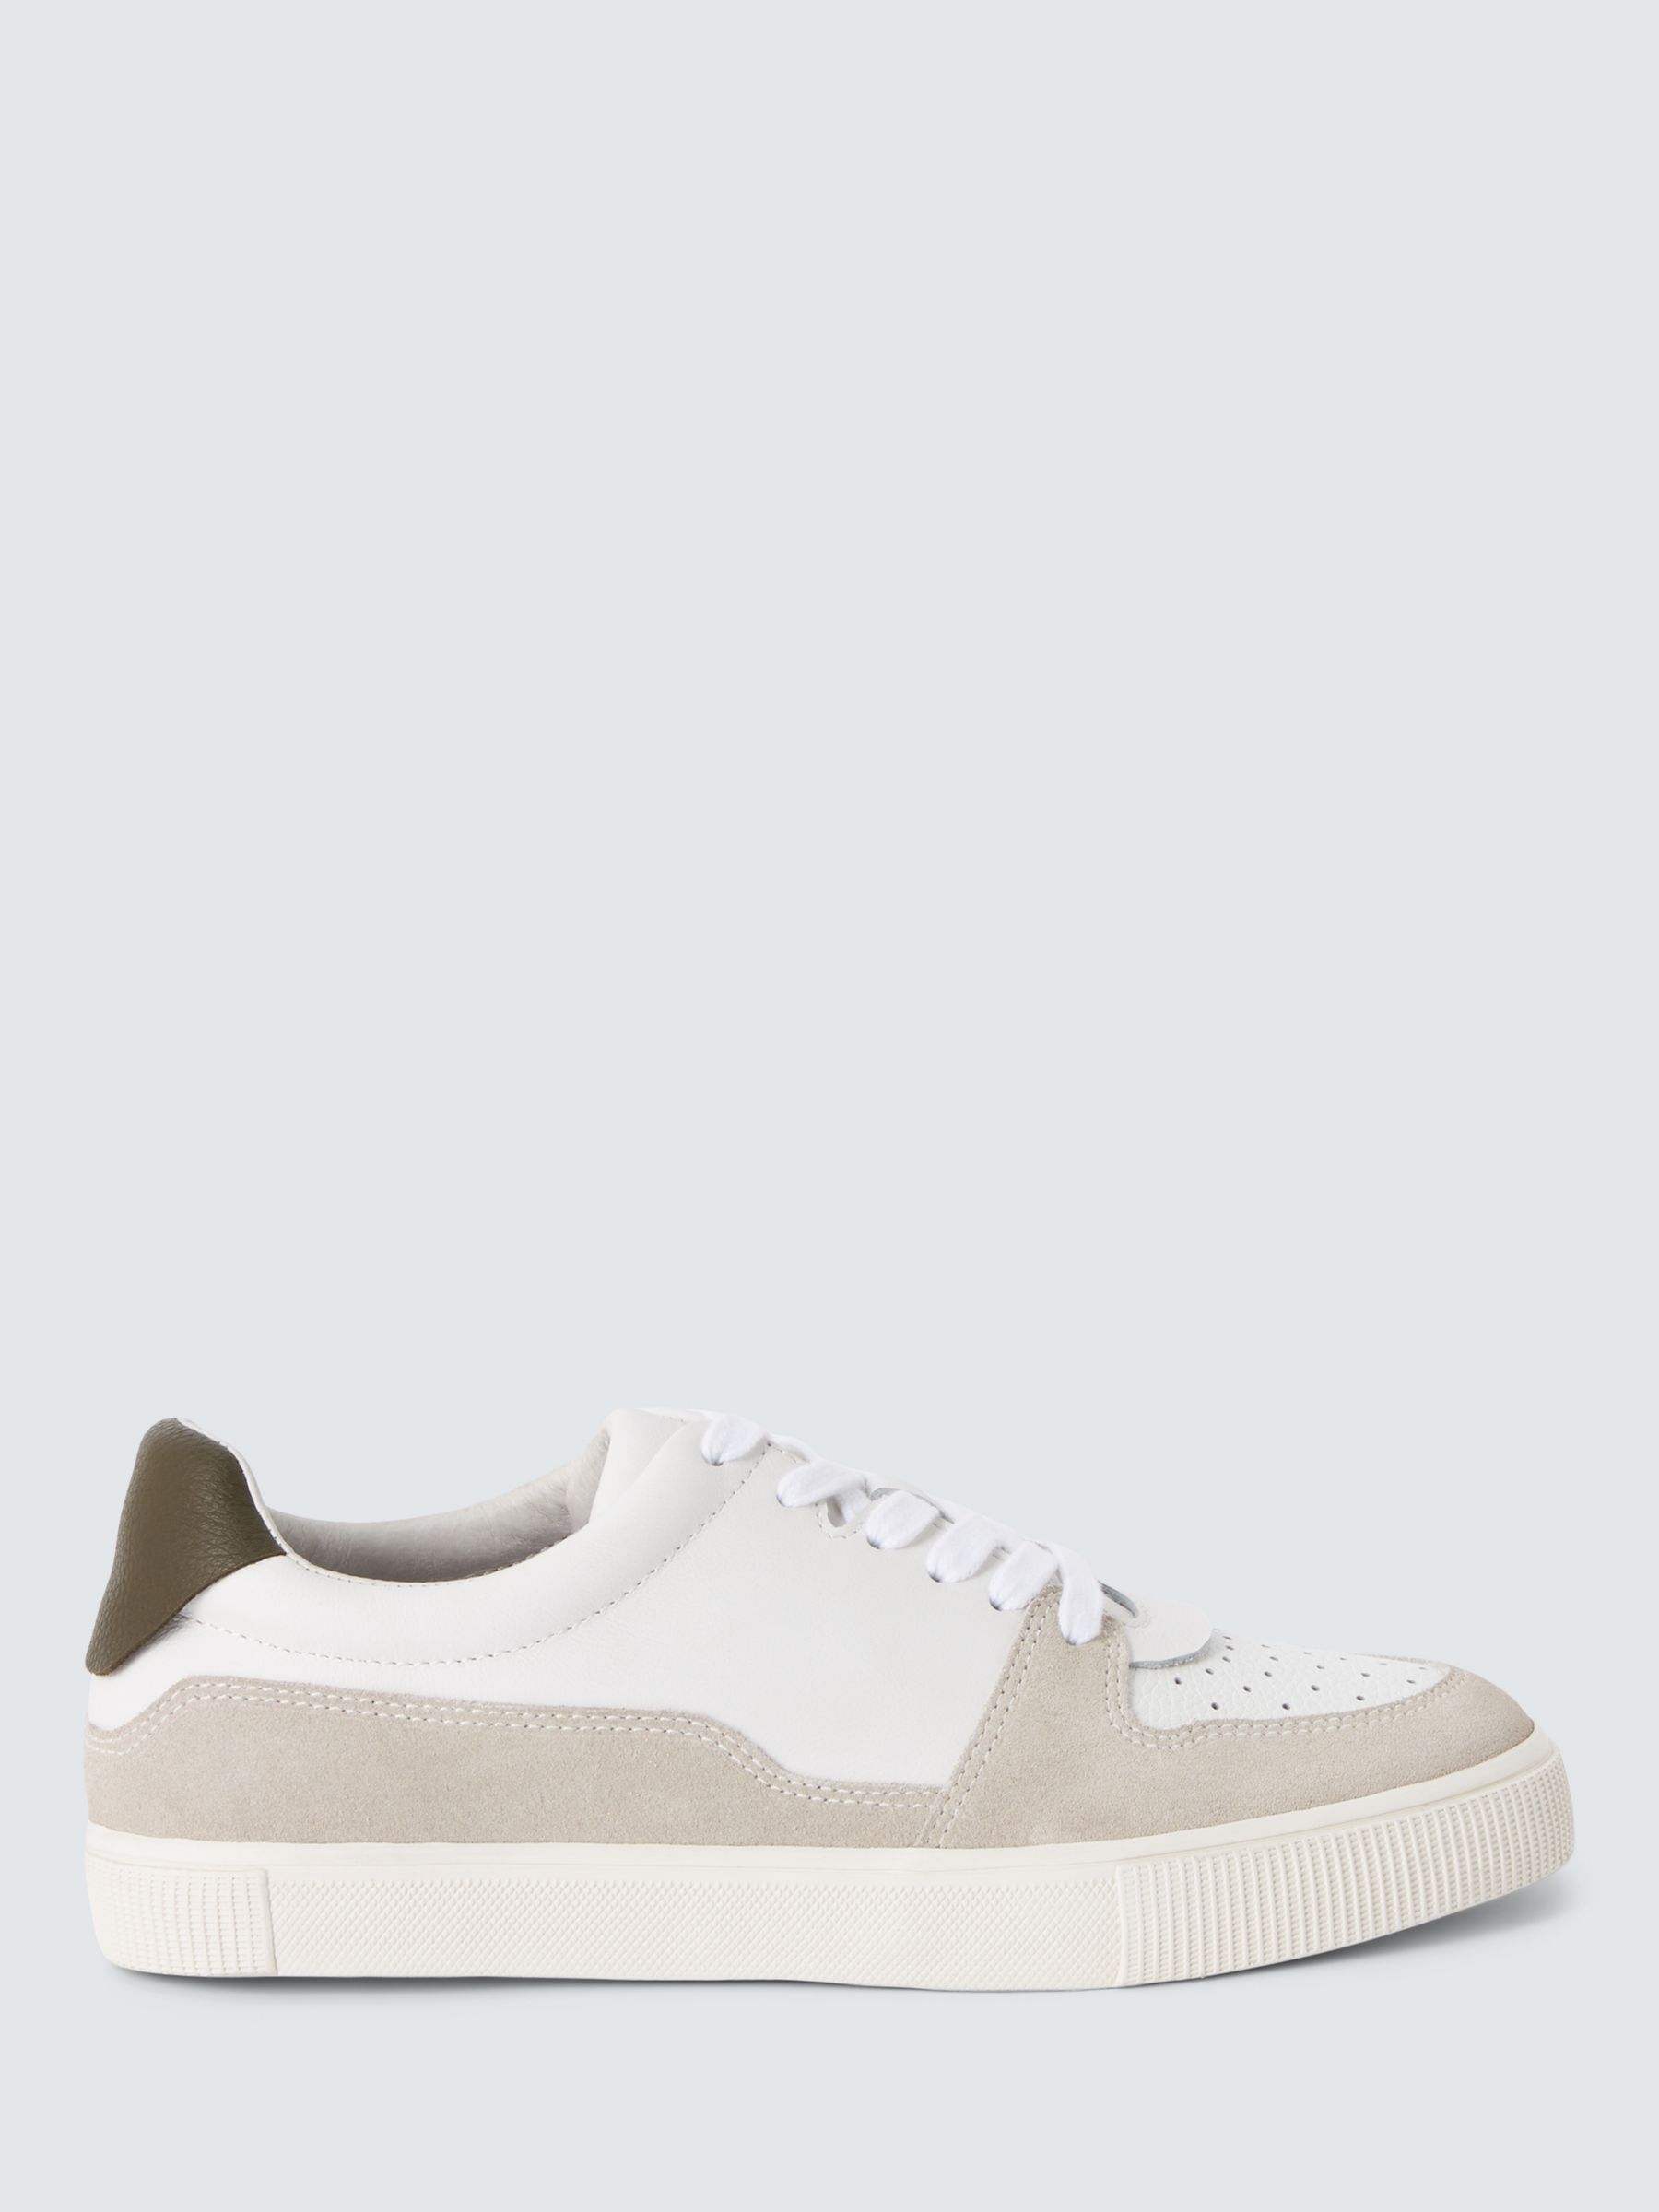 John Lewis Fable Perforated Mixed Material Lace Up Trainers, Off White, 6